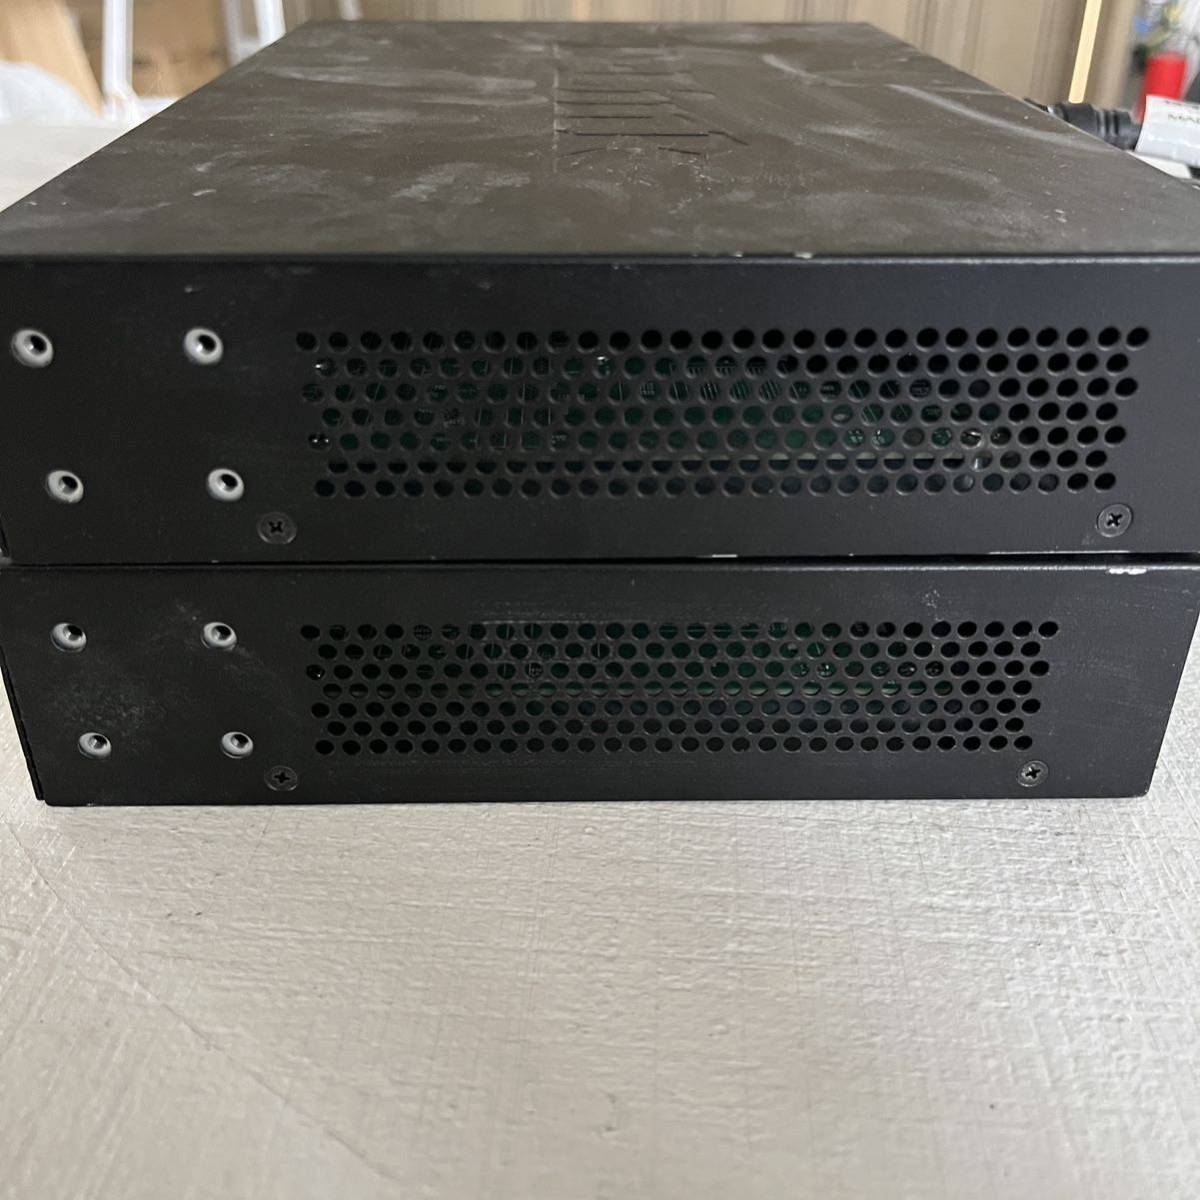 D-Link DGS-1100-16 Switch ポート数16 2台まとめて_画像9